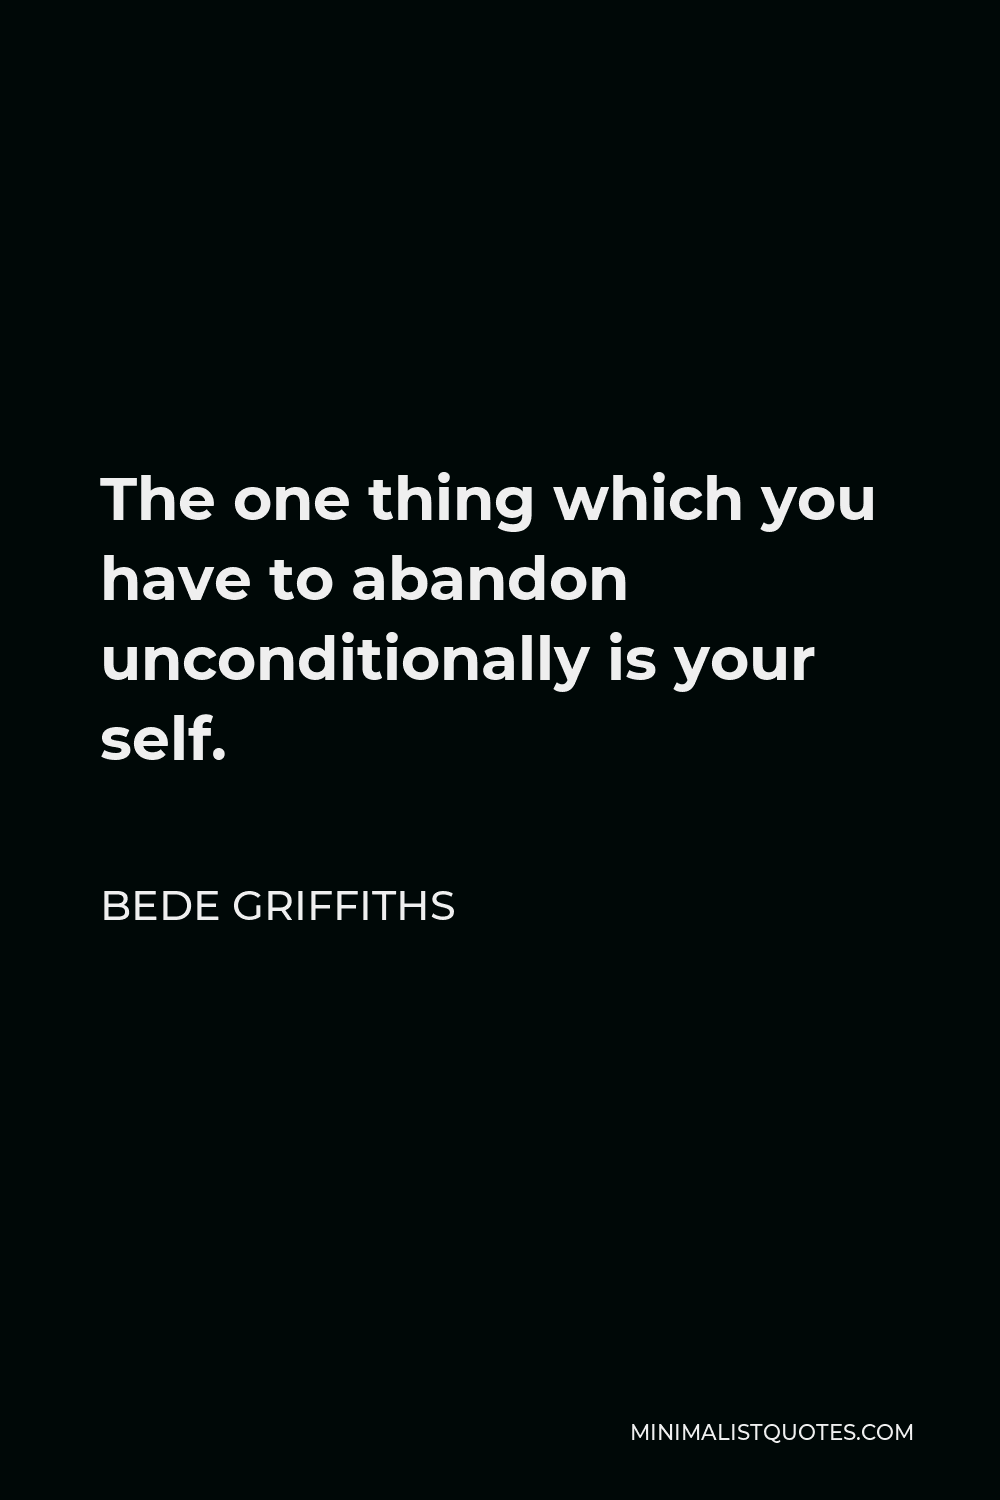 Bede Griffiths Quote - The one thing which you have to abandon unconditionally is your self.